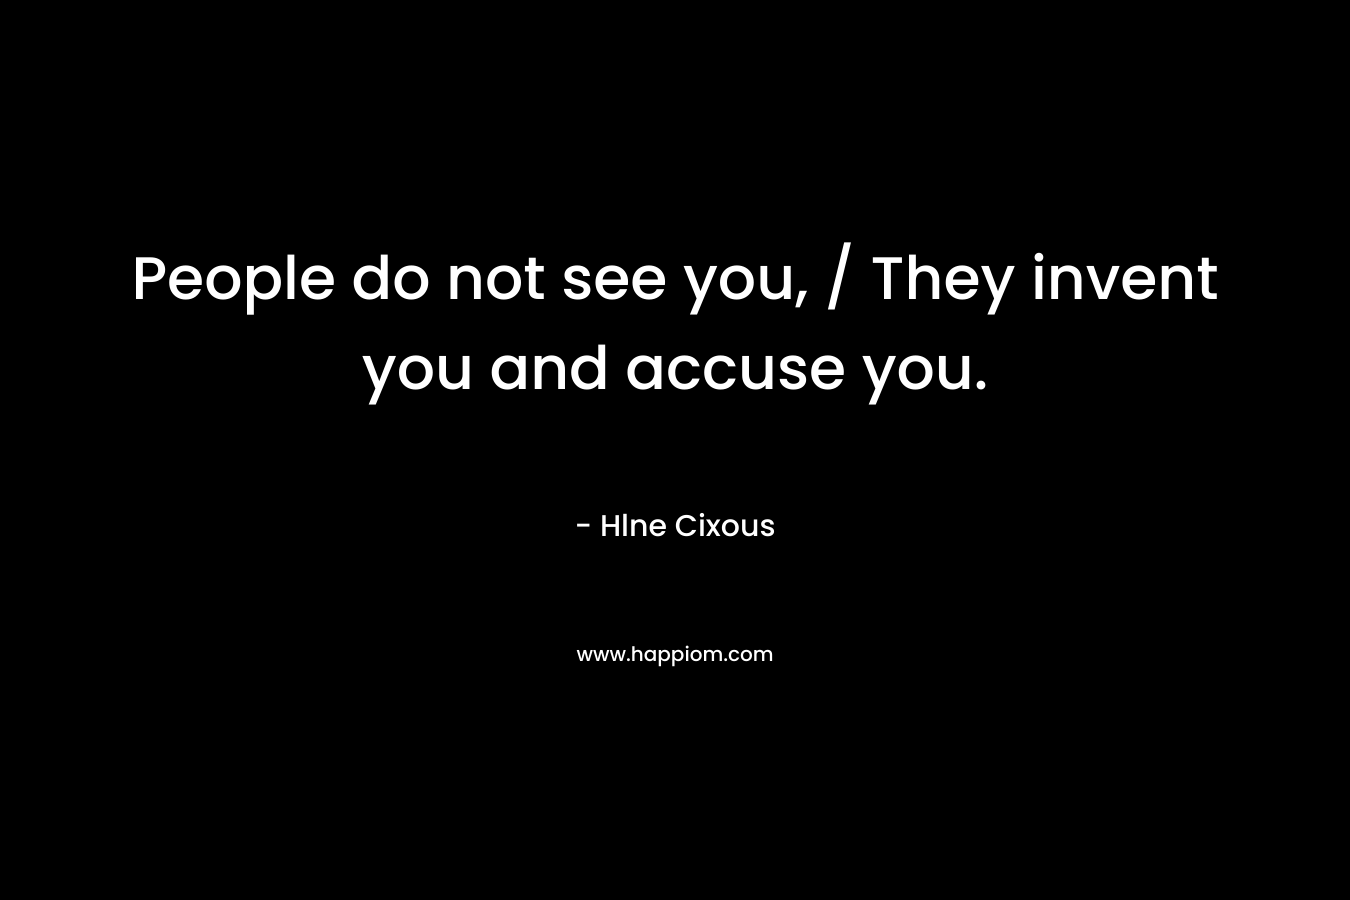 People do not see you, / They invent you and accuse you.